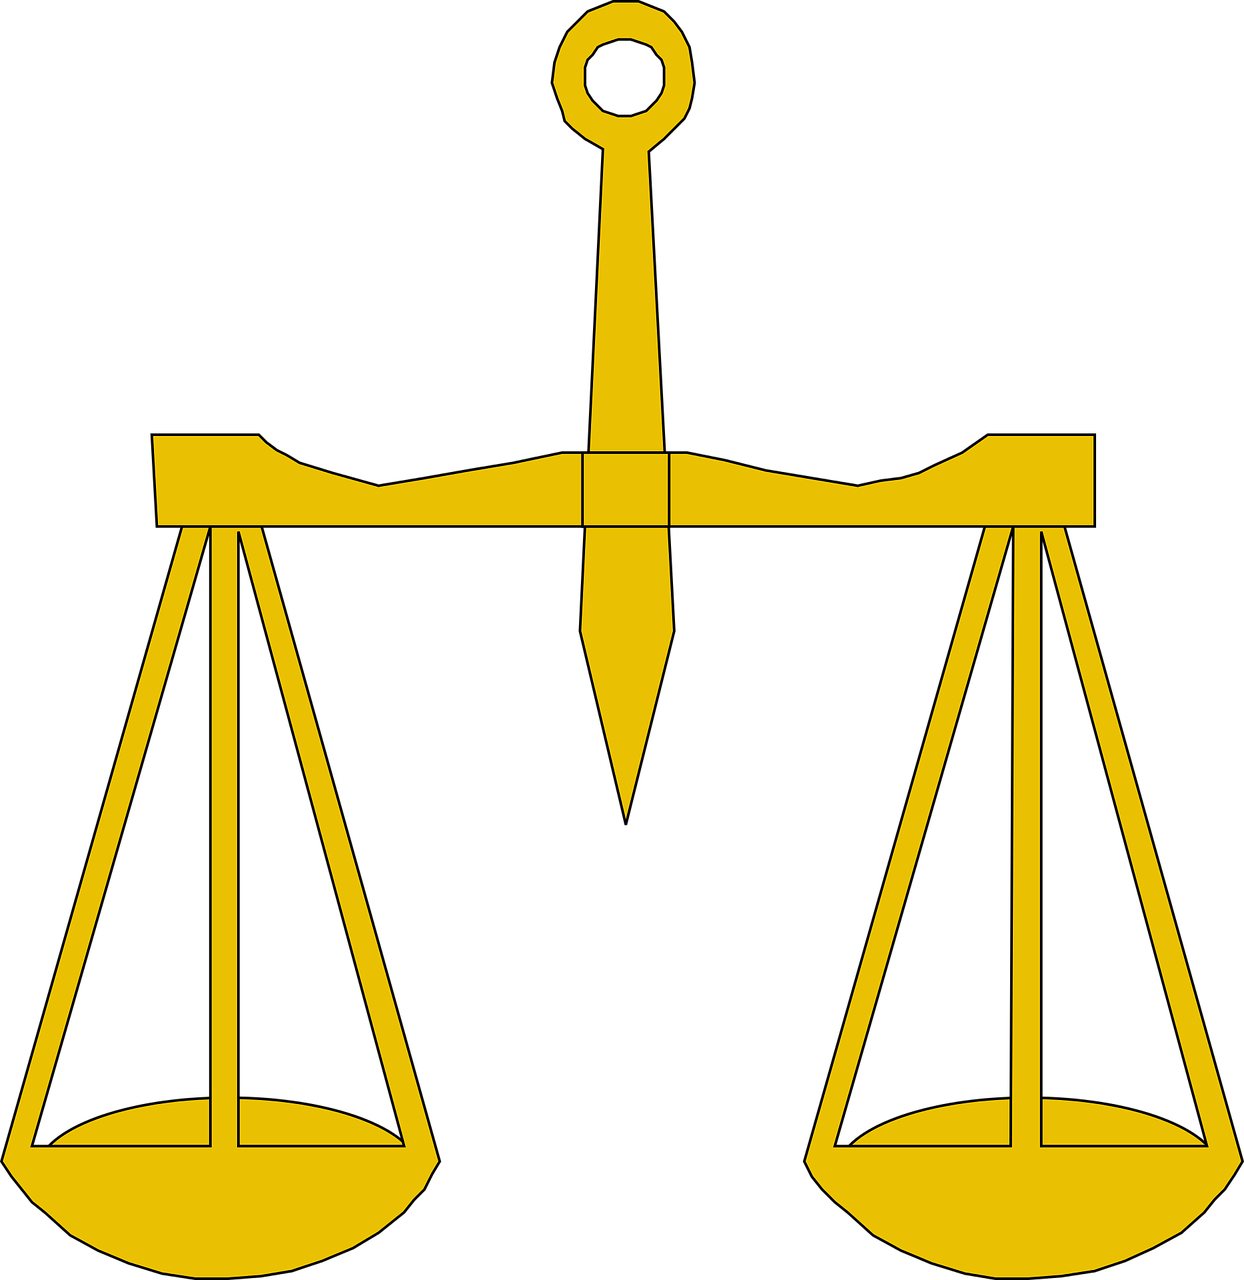 Instrument Justice Scale Png Image - Weighing Scale (1244x1280)